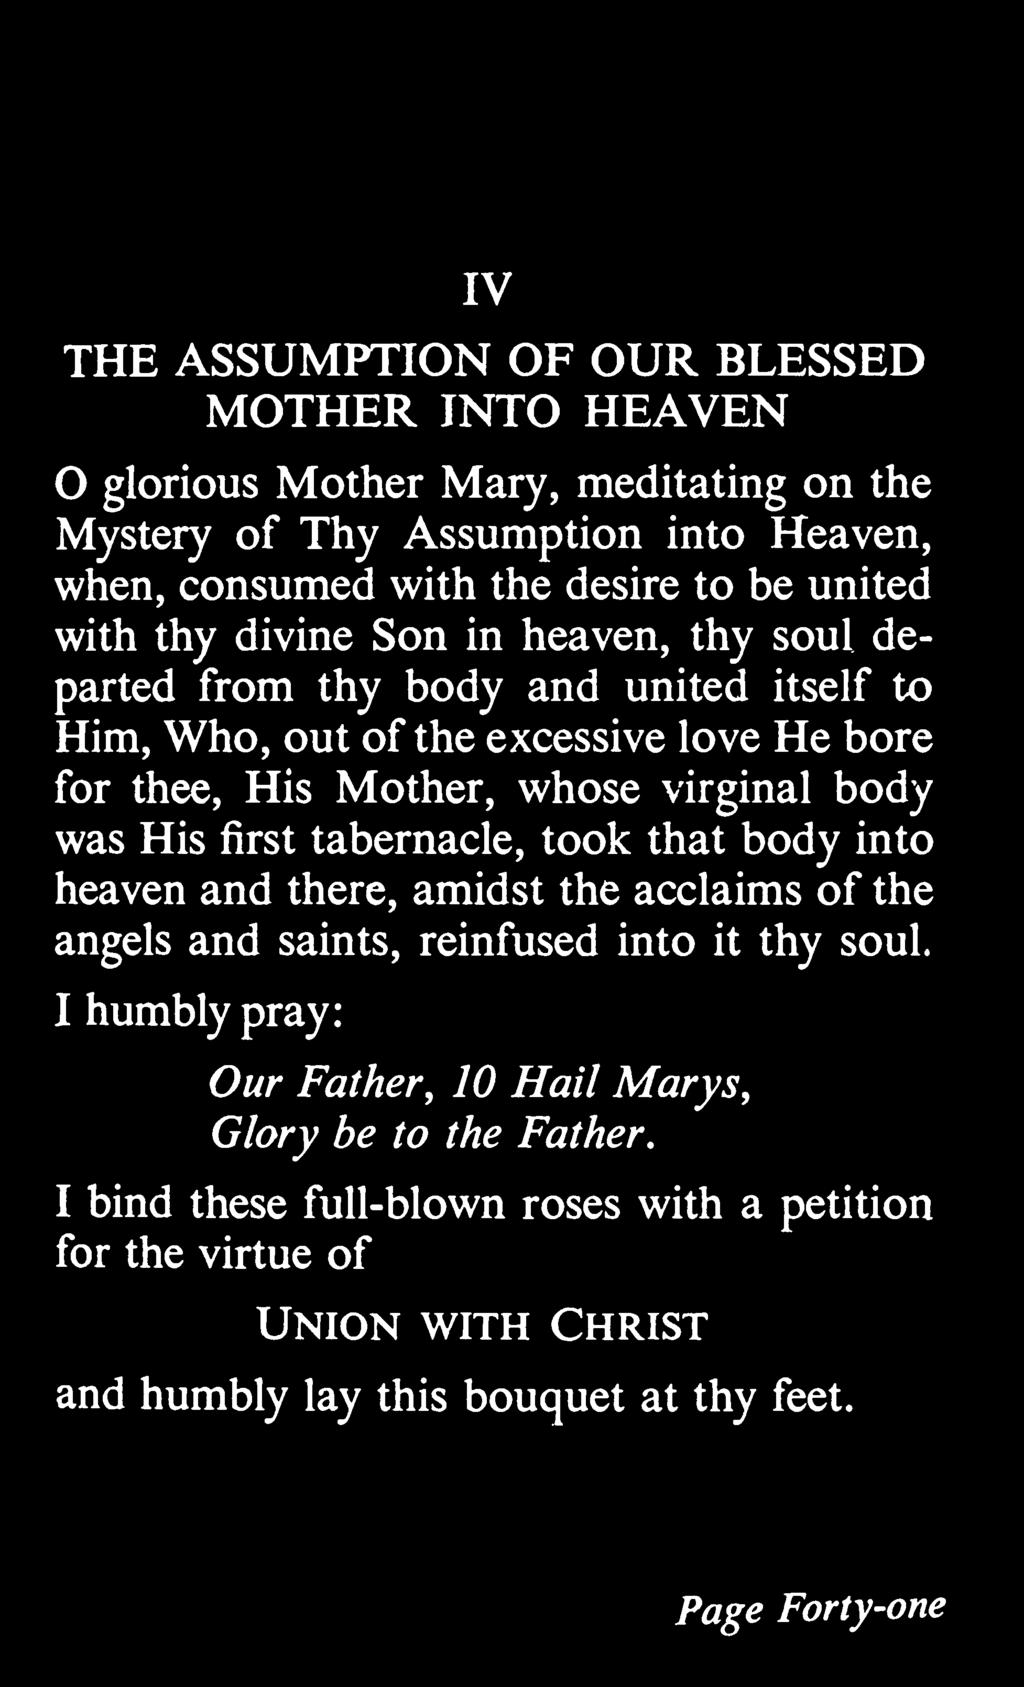 His Mother, whose virginal body was His first tabernacle, took that body into heaven and there, amidst the acclaims of the angels and saints, reinfused into it thy soul.